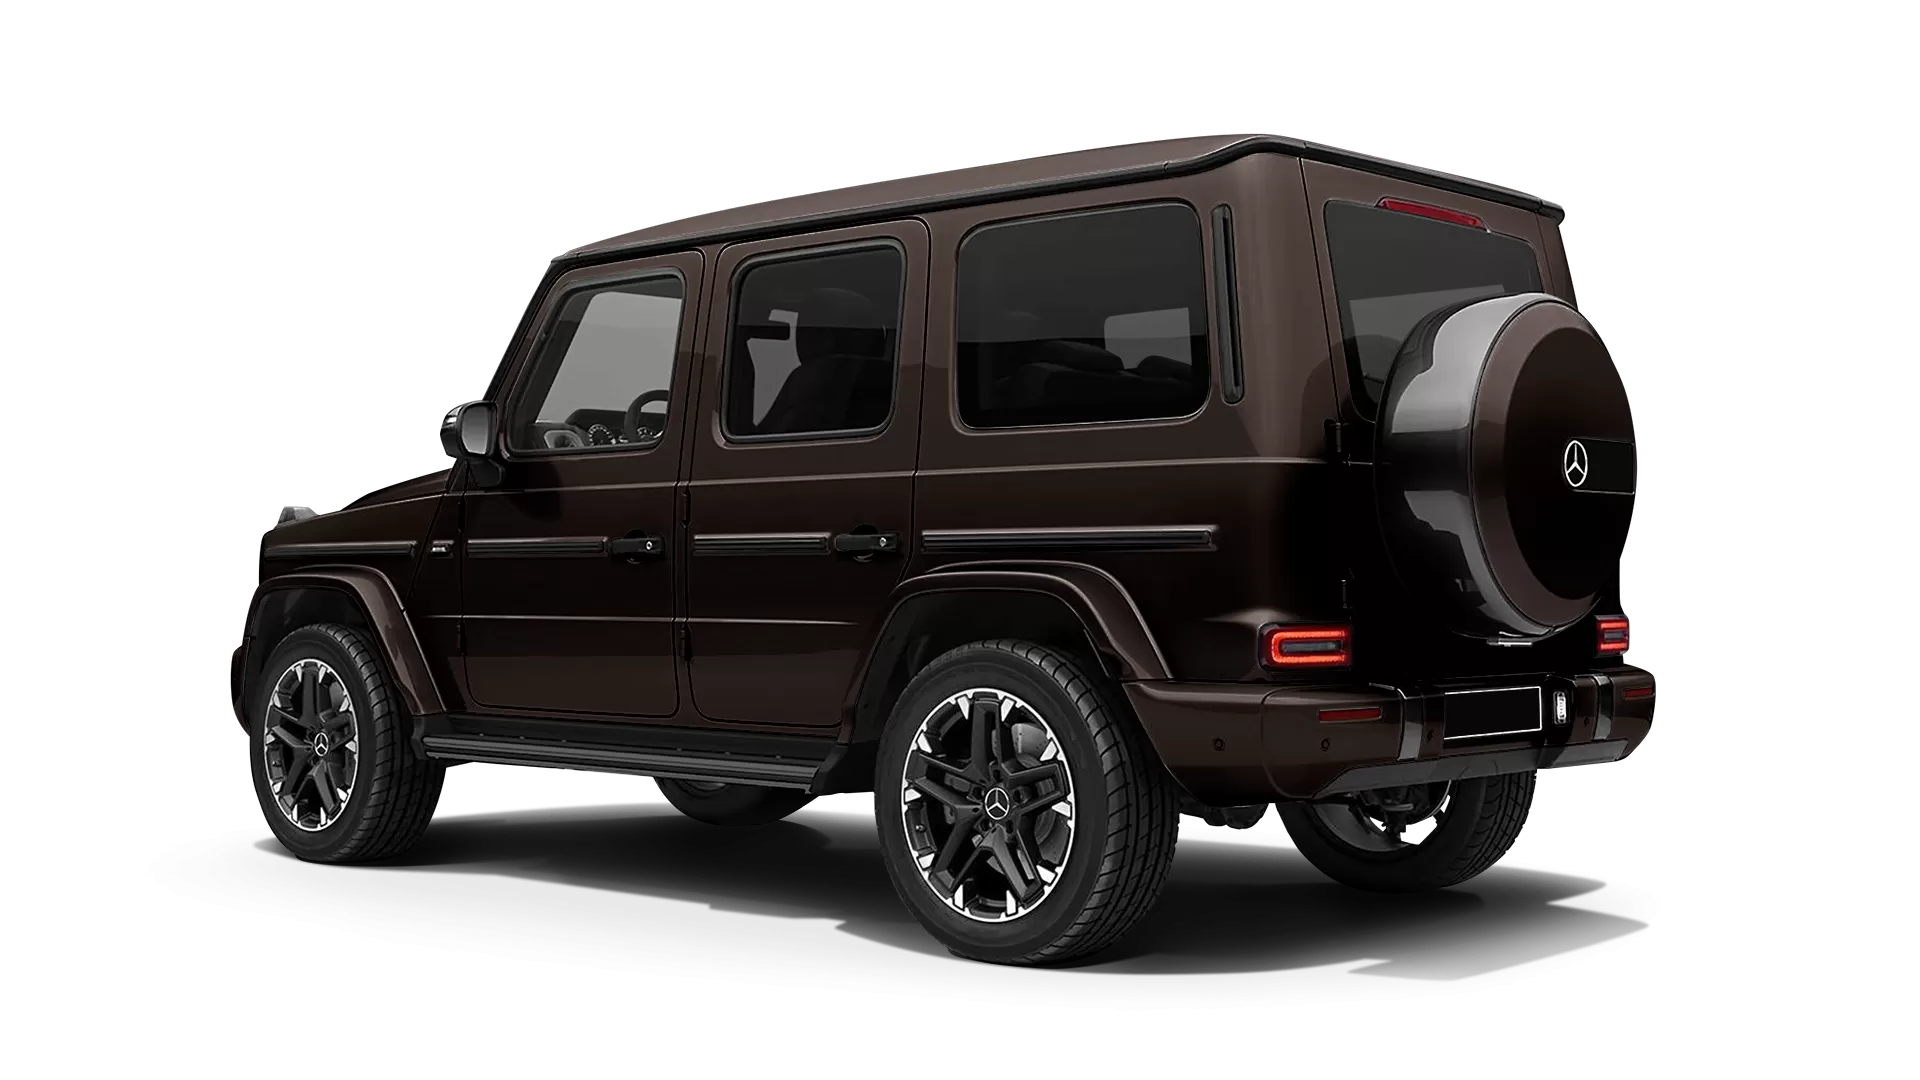 Mercedes G class W463 stock rear view in Citrine Brown color